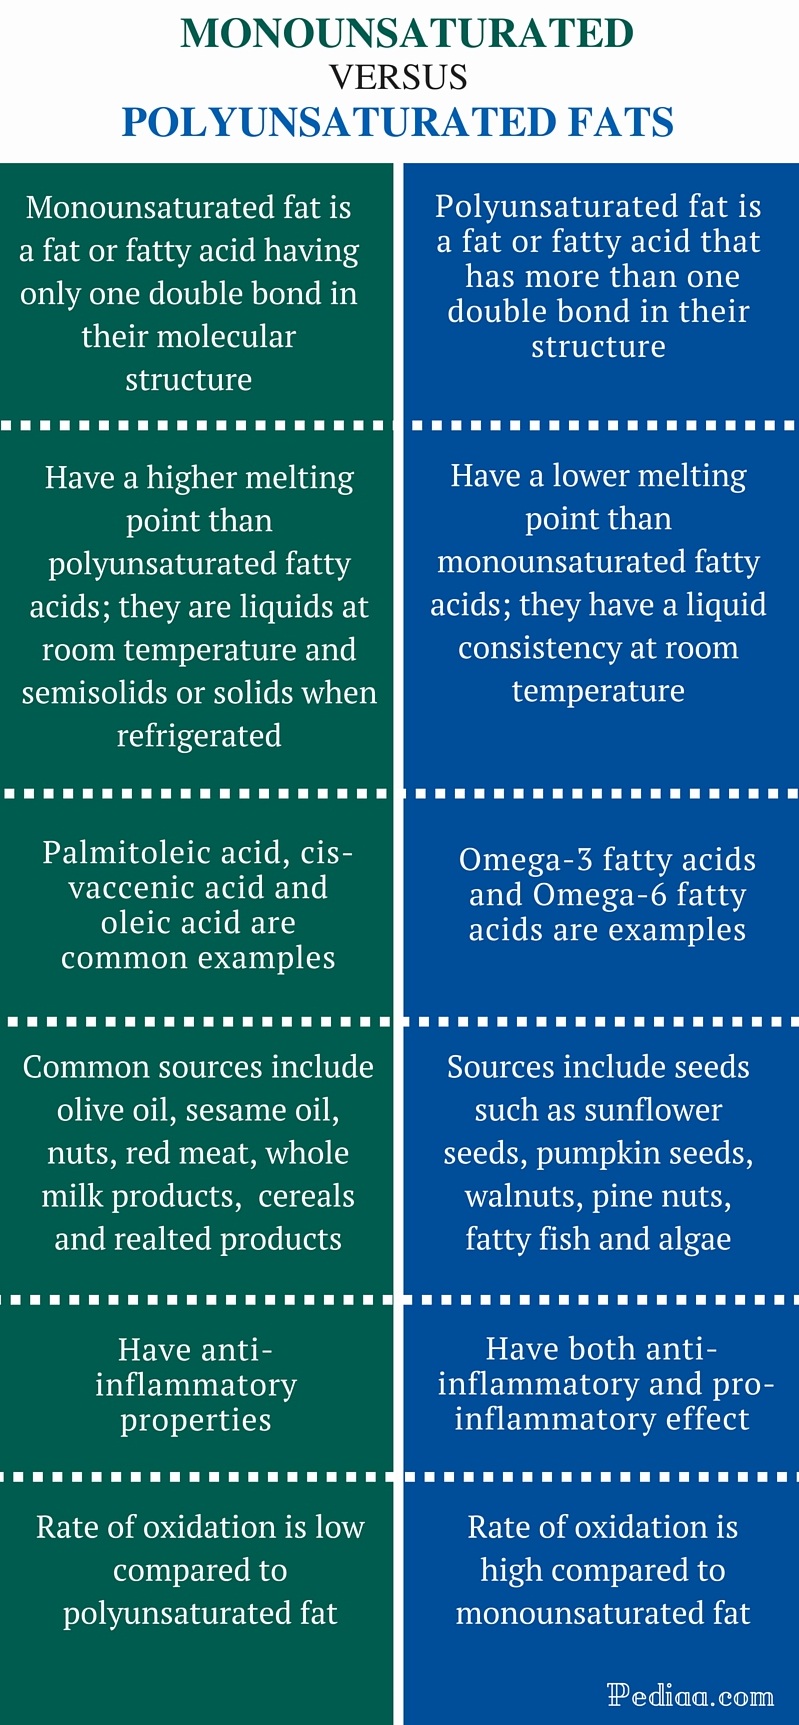 difference between monounsaturated and polyunsaturated fats